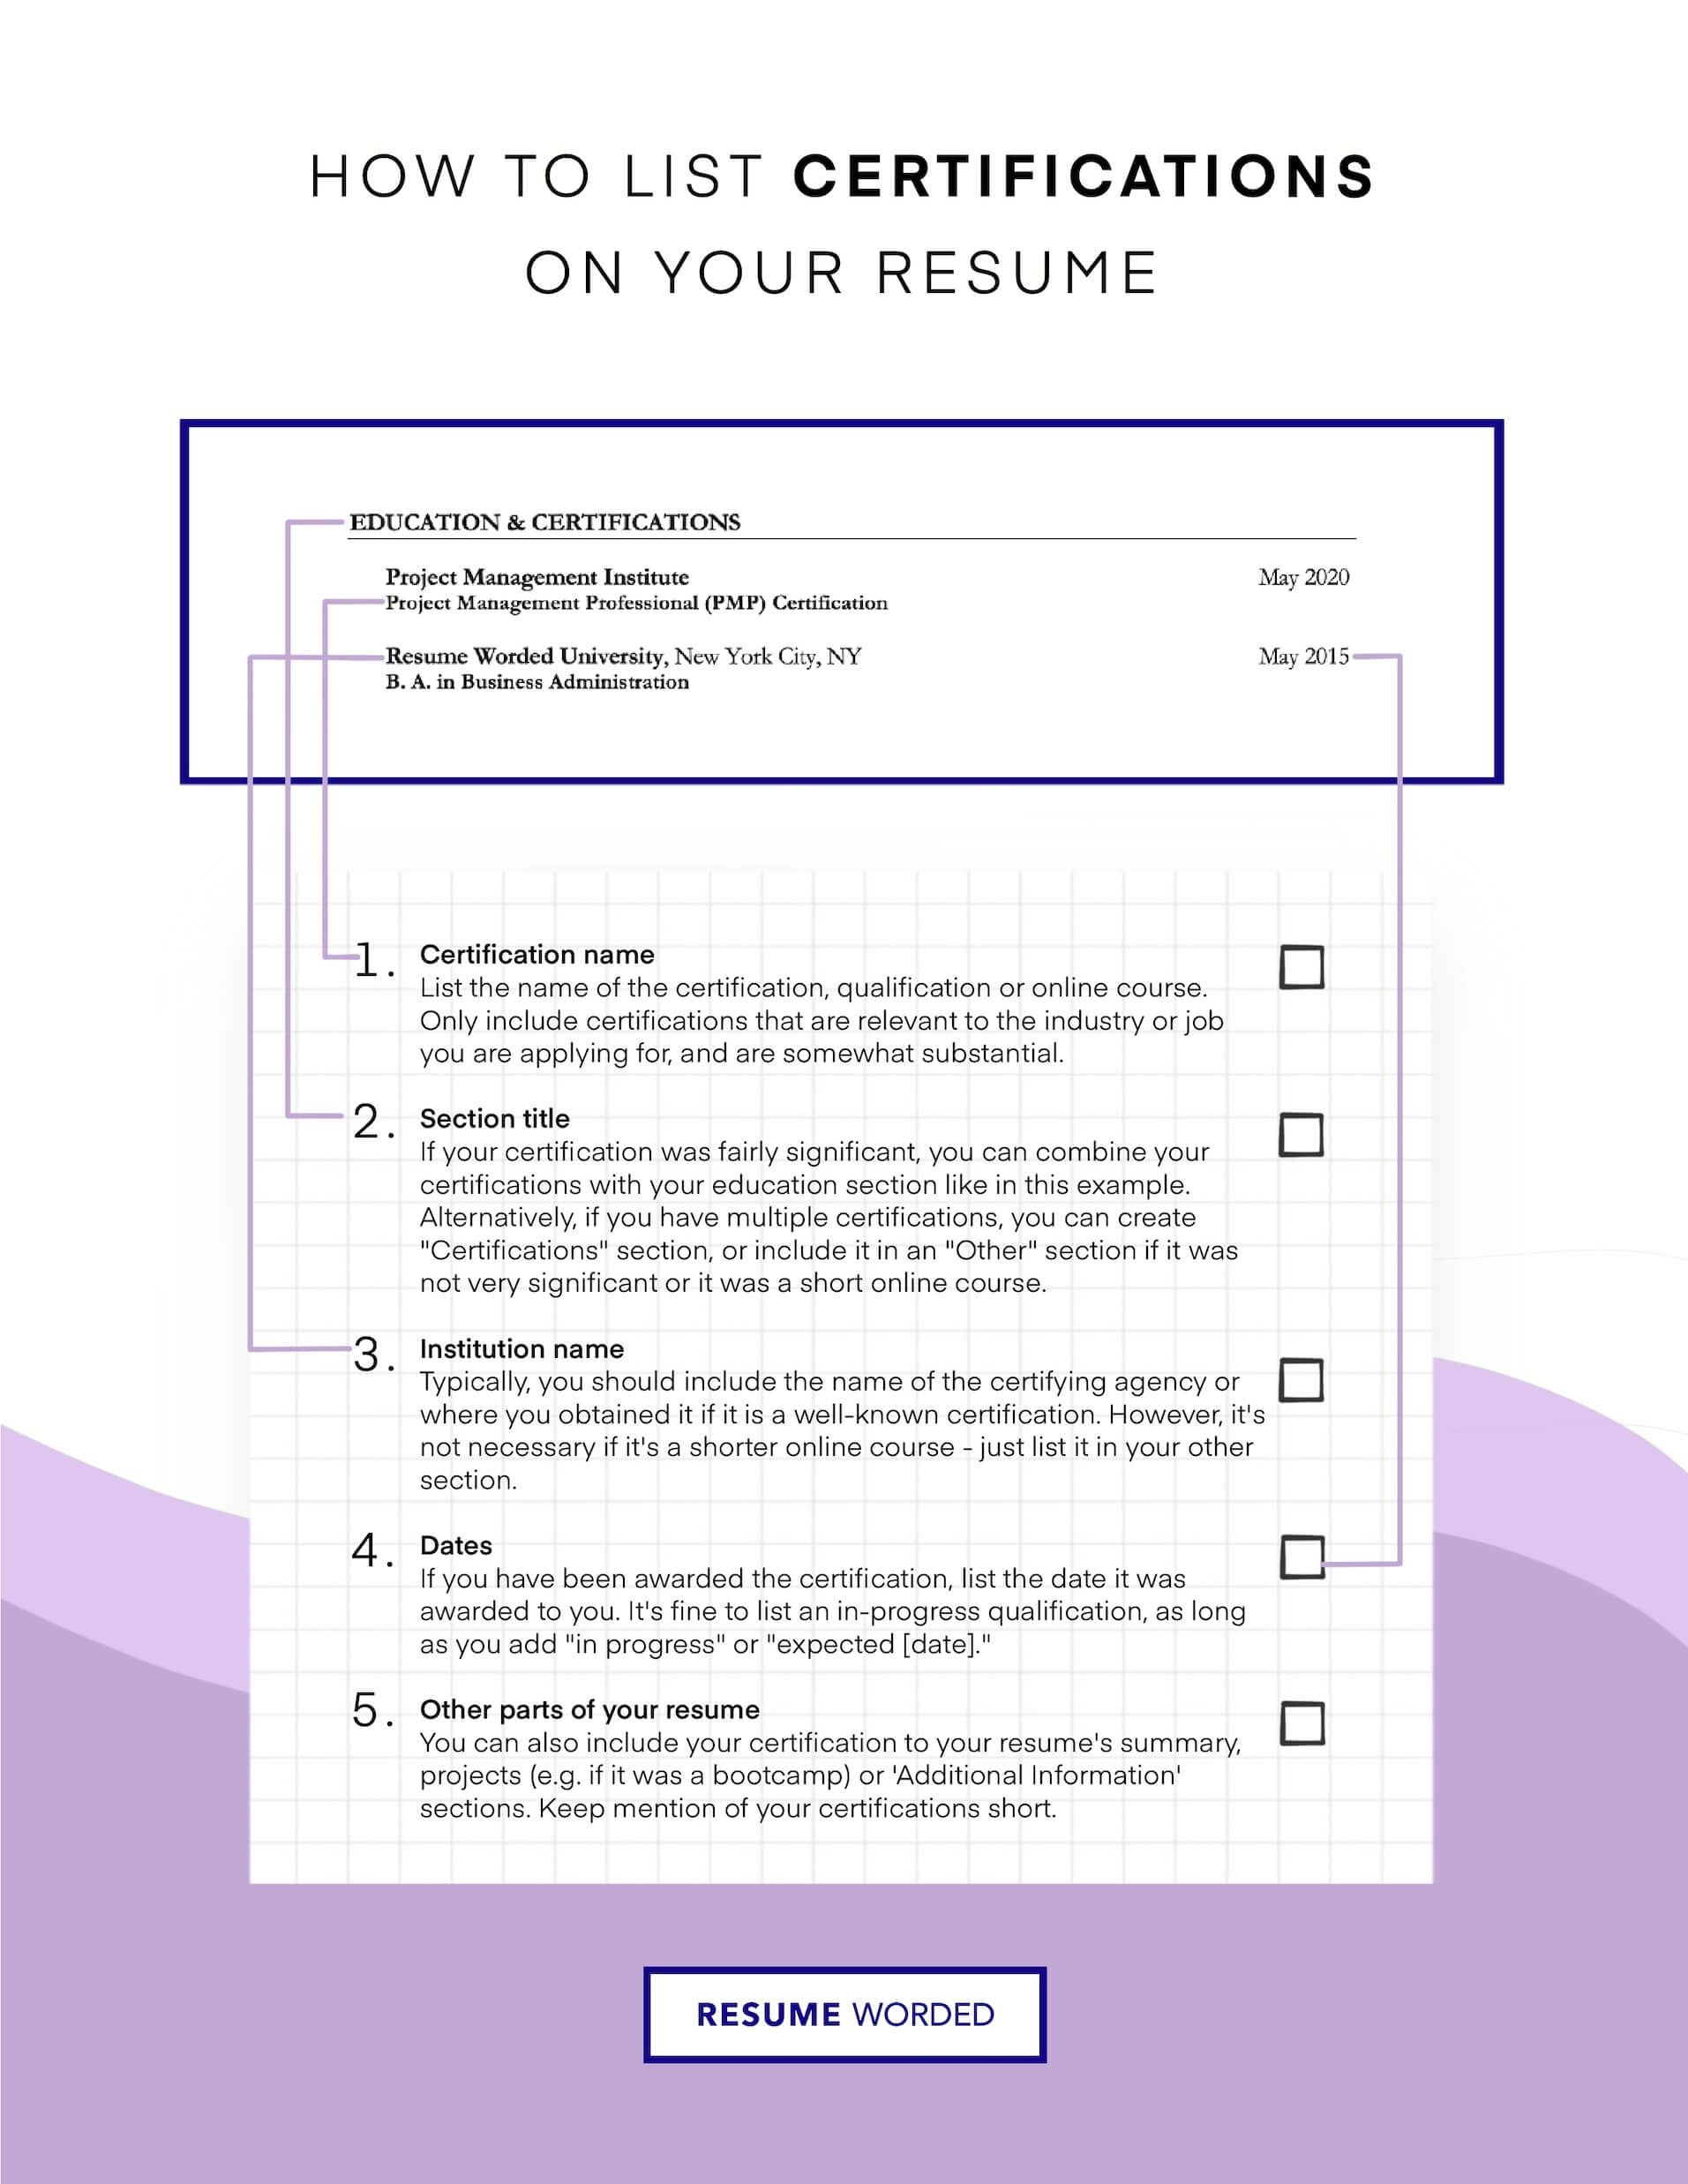 Include relevant certifications - Tax Accountant Resume